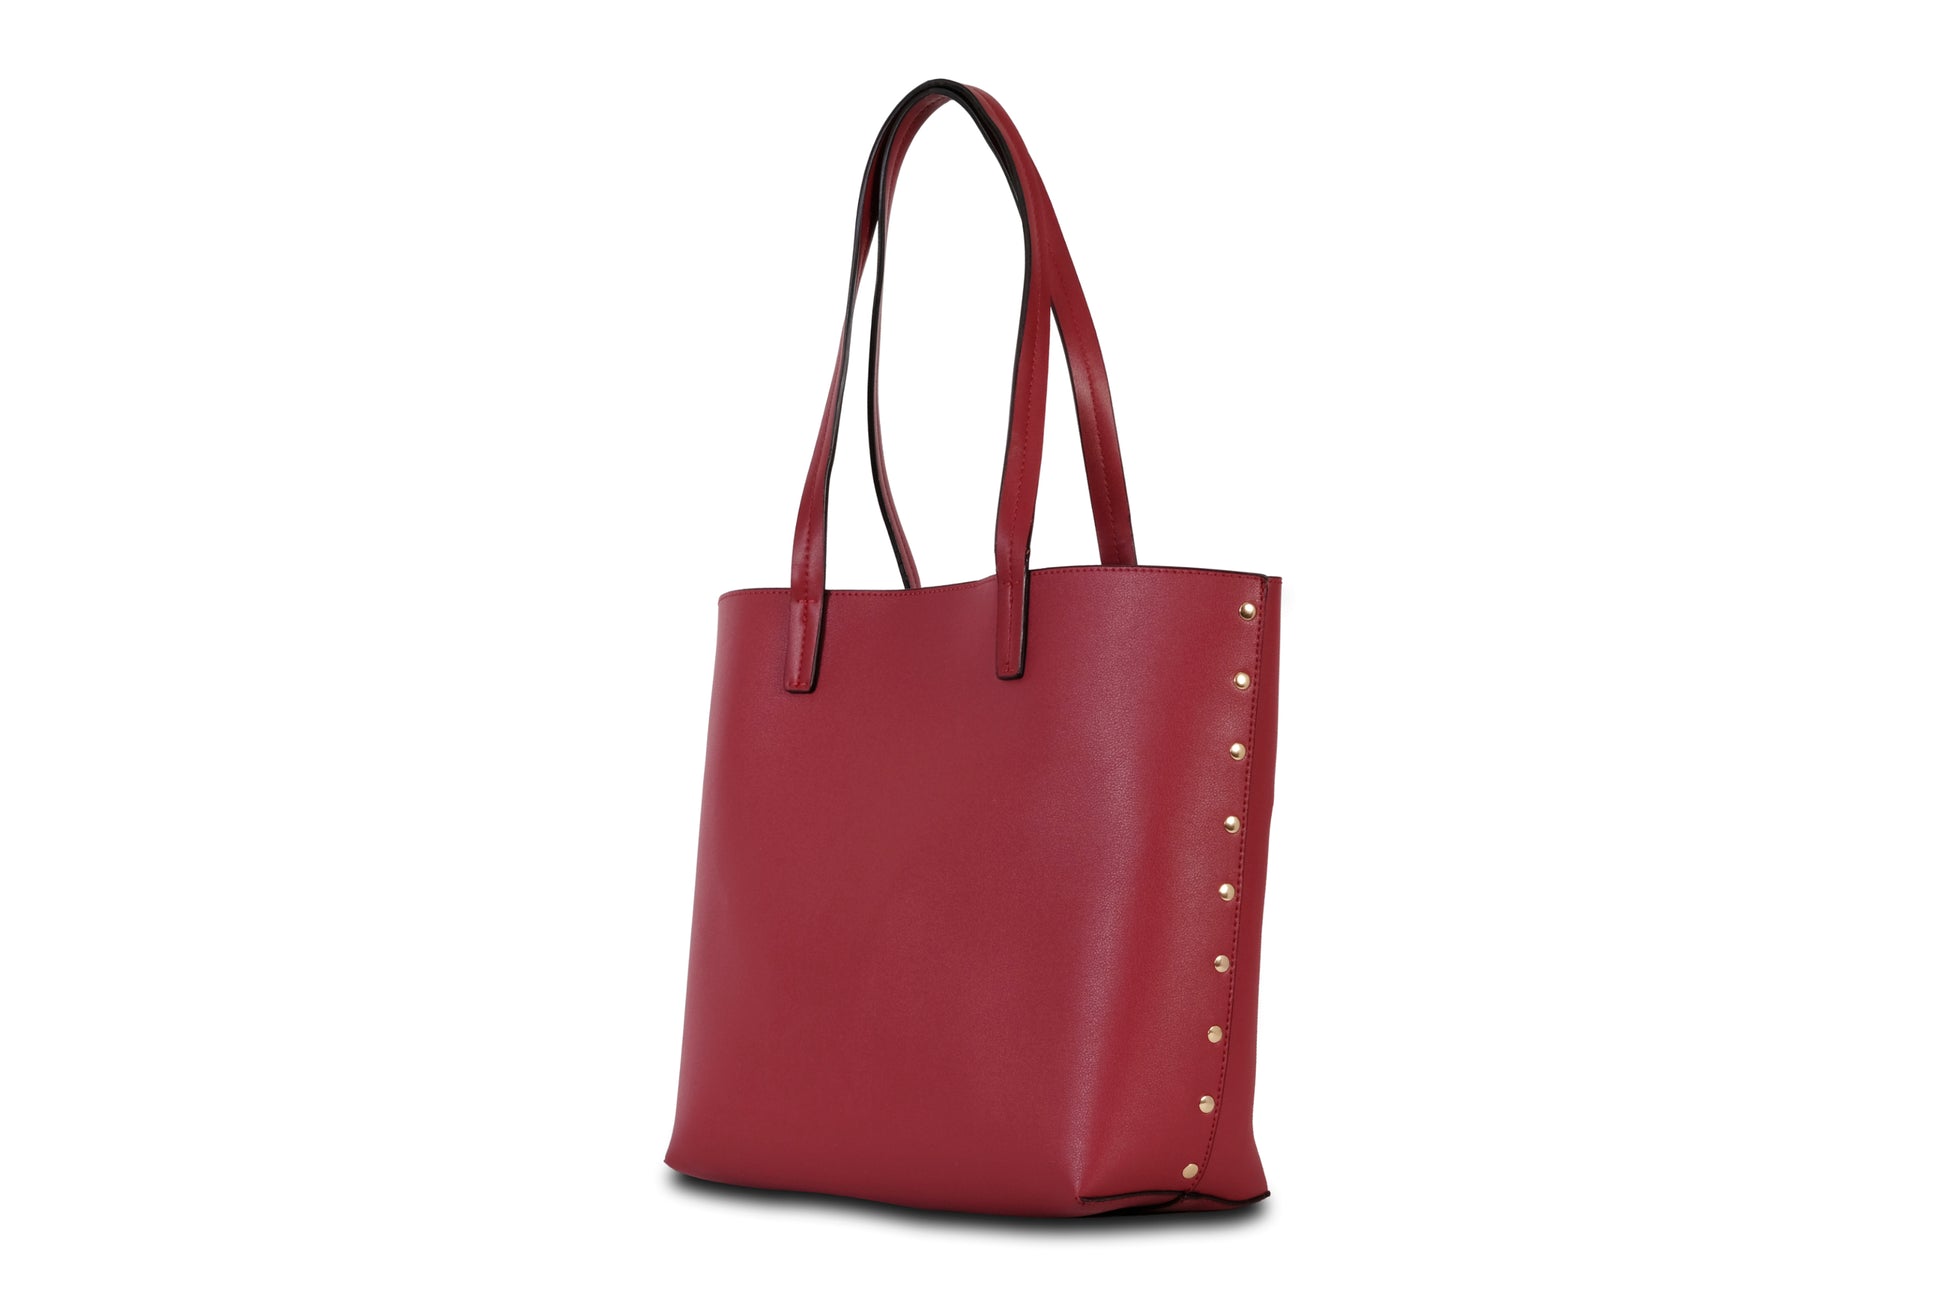 Rowi Pebble Grain Faux Leather Scarlet Red Tote Bag Handbag made by Dewi Maya side view available at the best boutique in Upstate South Carolina Spartanburg Greenville Dewi Maya Boutique